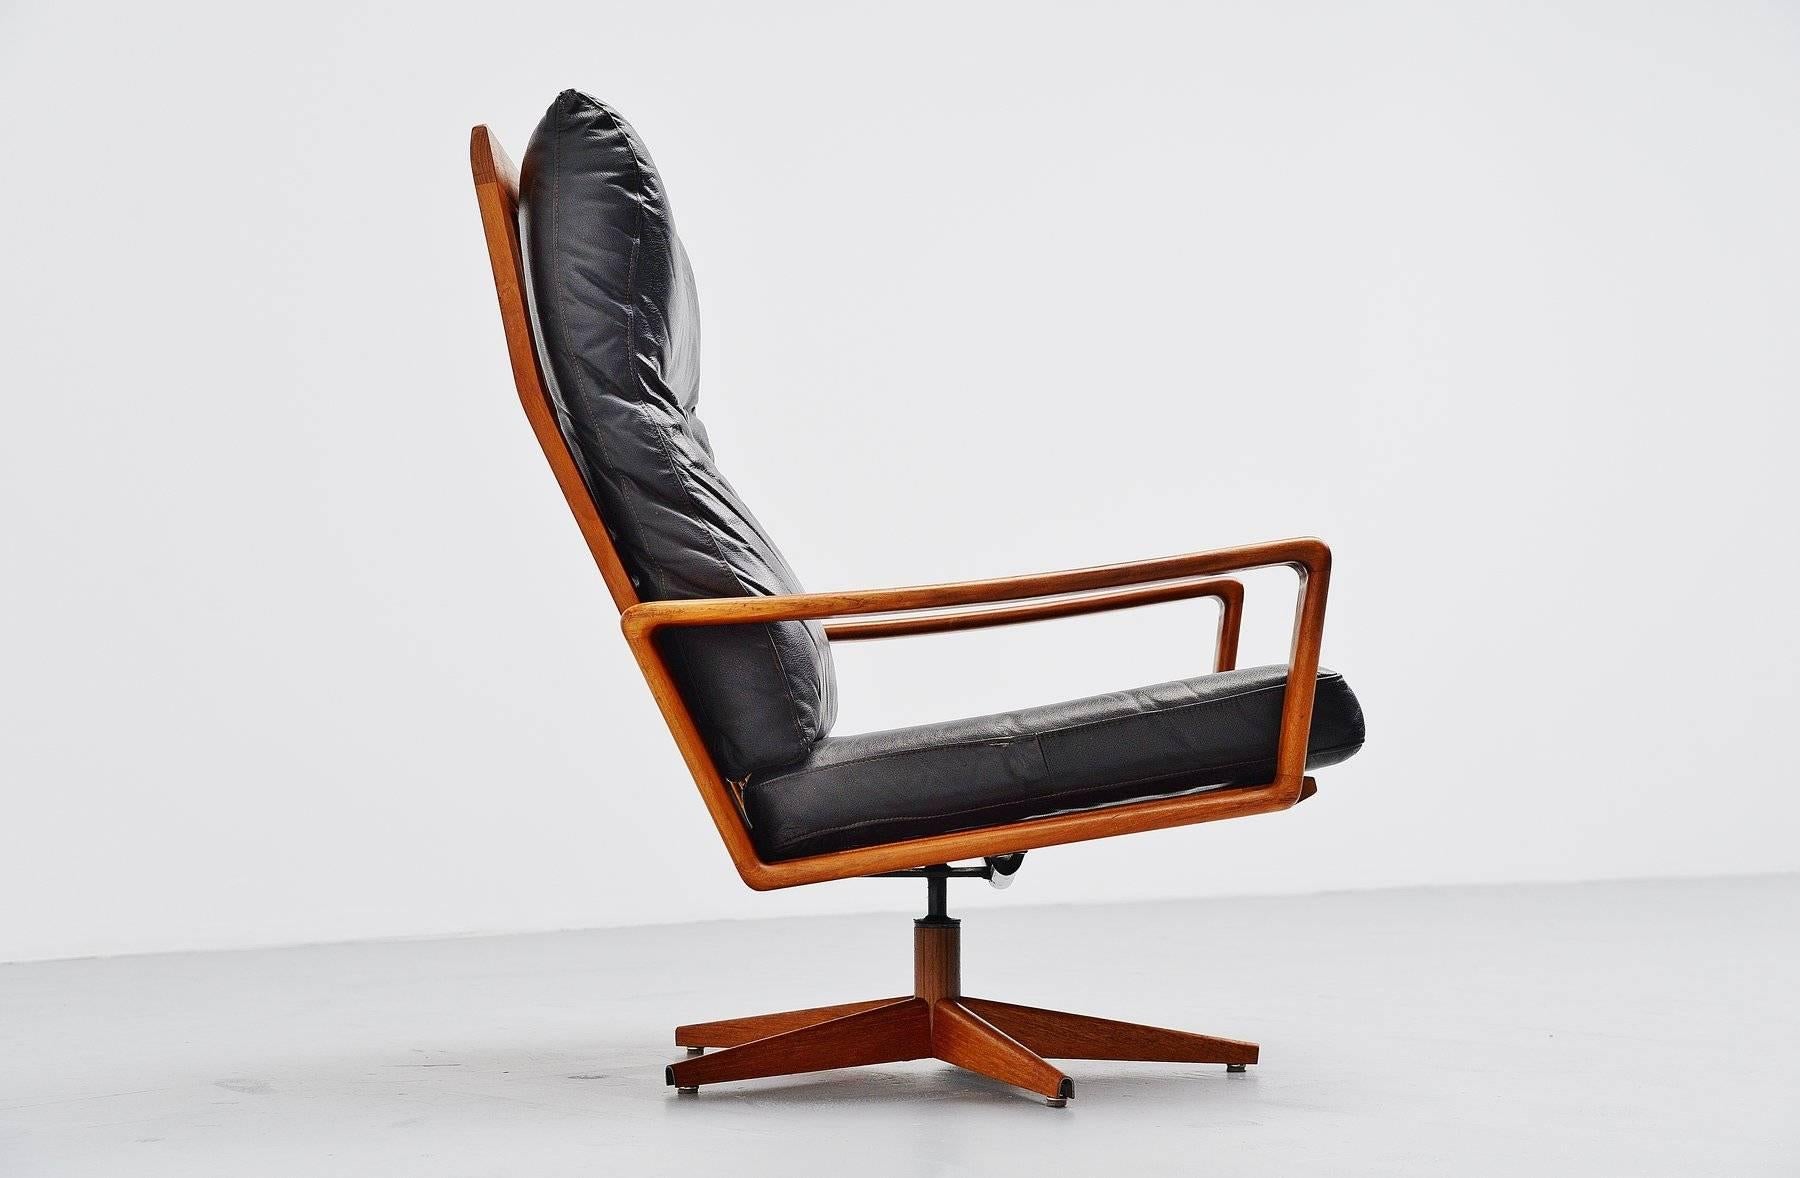 Comfortable swivel lounge chair designed by Arne Wahl Iversen for Komfort, Denmark, 1960. This chair has a solid teak wooden frame with a metal base covered with teak veneer and a black leather seat. It swivels for comfort seating. The chair is in